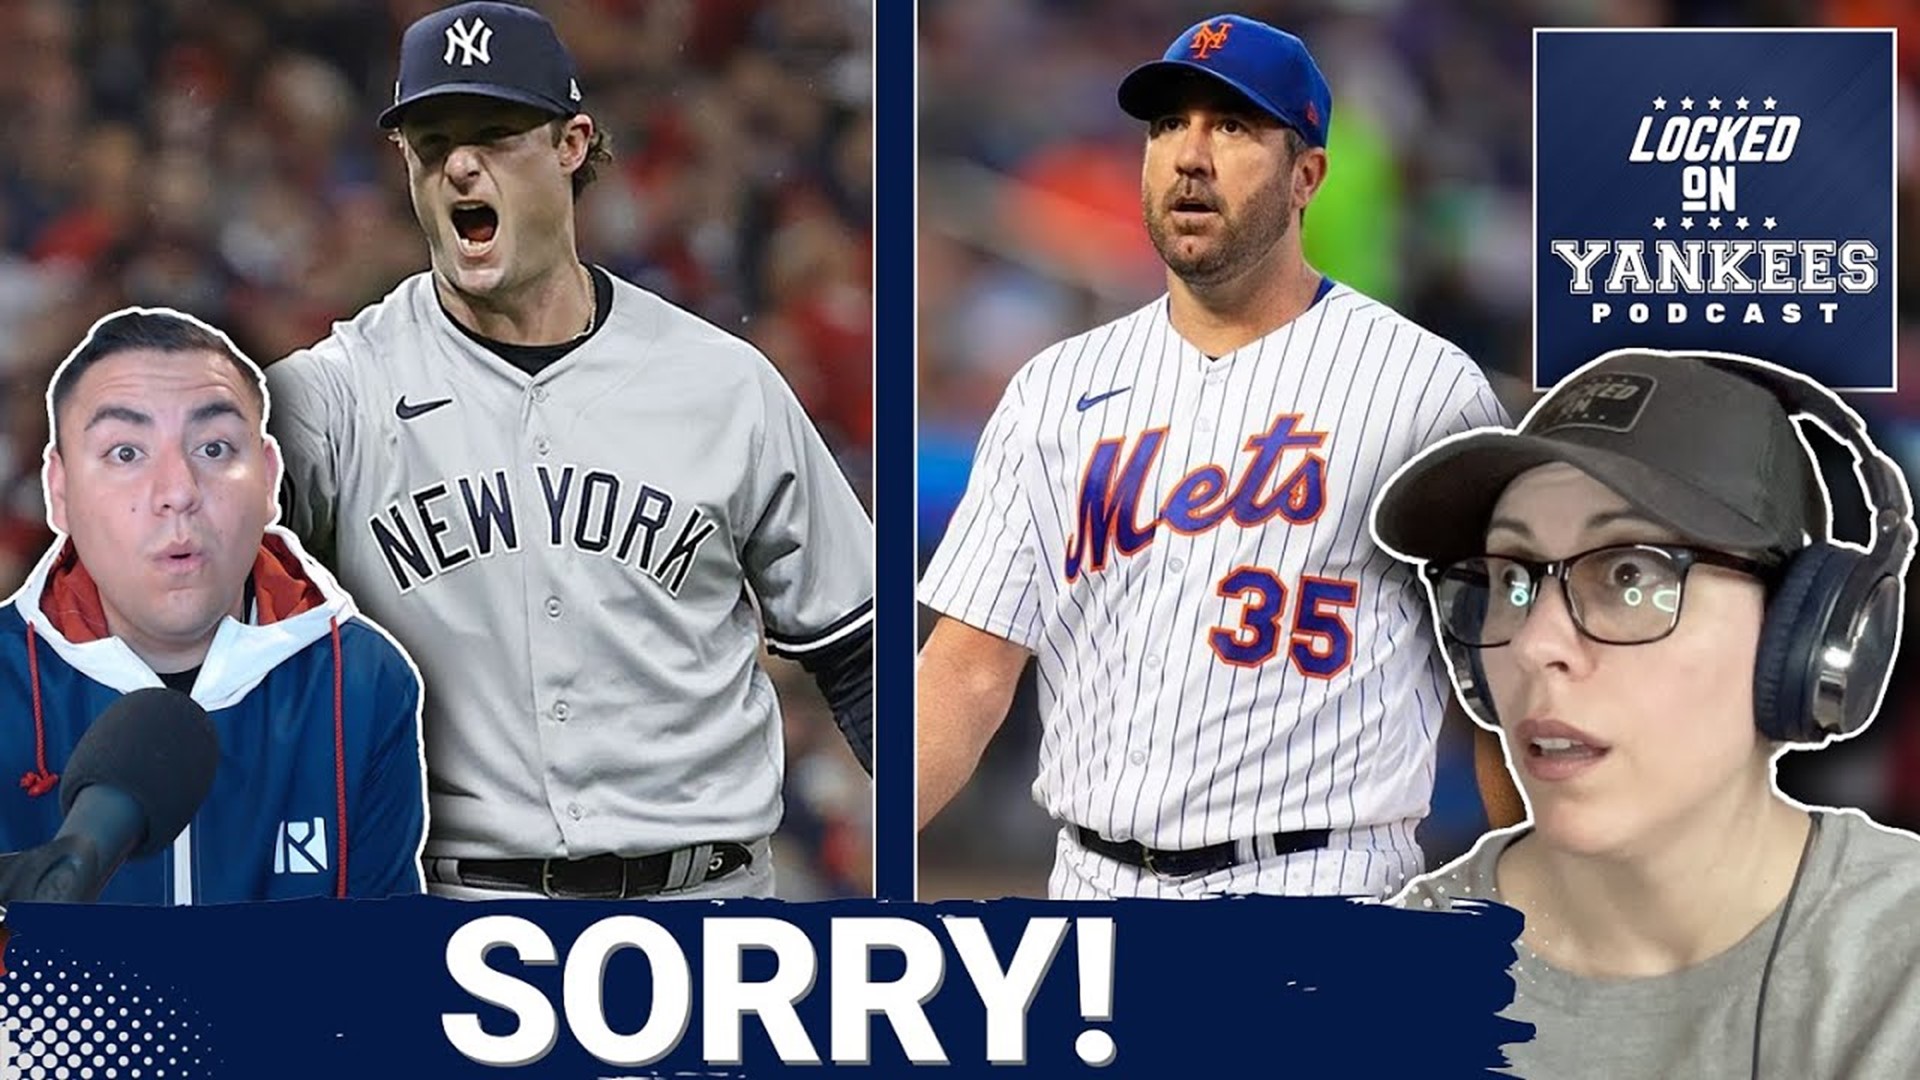 We were COMPLETELY WRONG about the Subway Series, NY Yankees Podcast